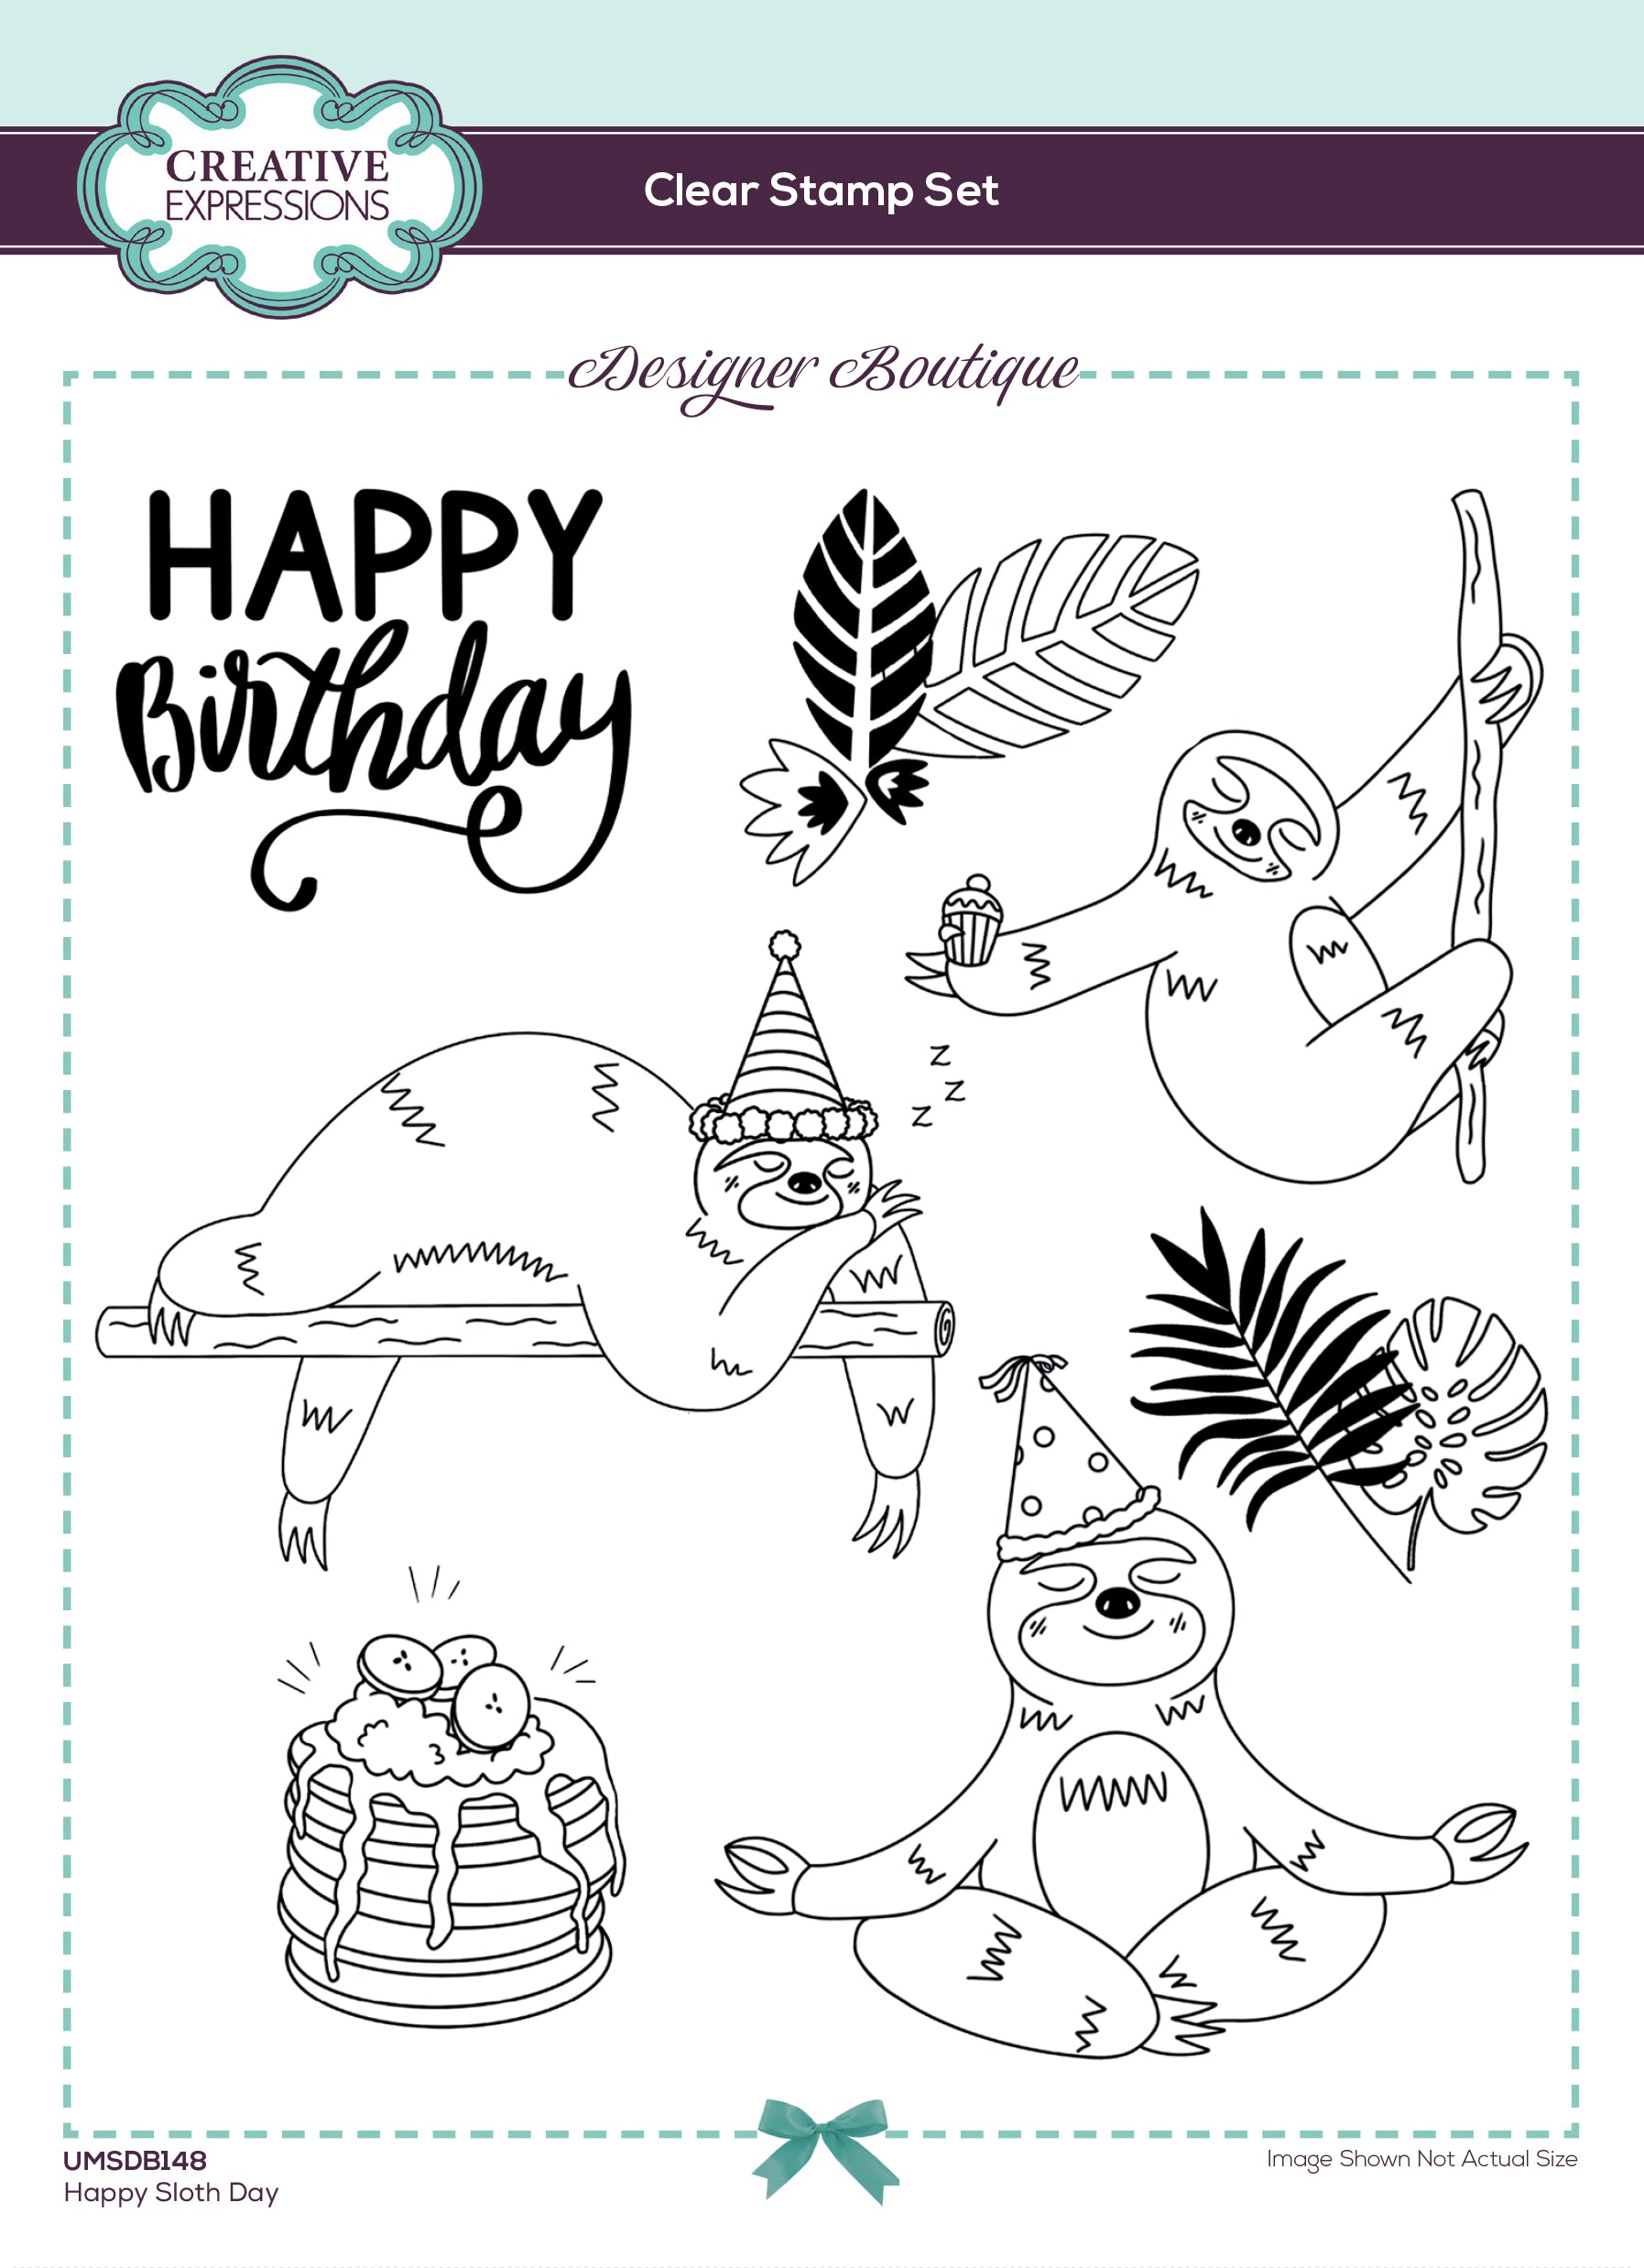 Creative Expressions Designer Boutique Happy Sloth Day 6 in x 8 in Stamp Set